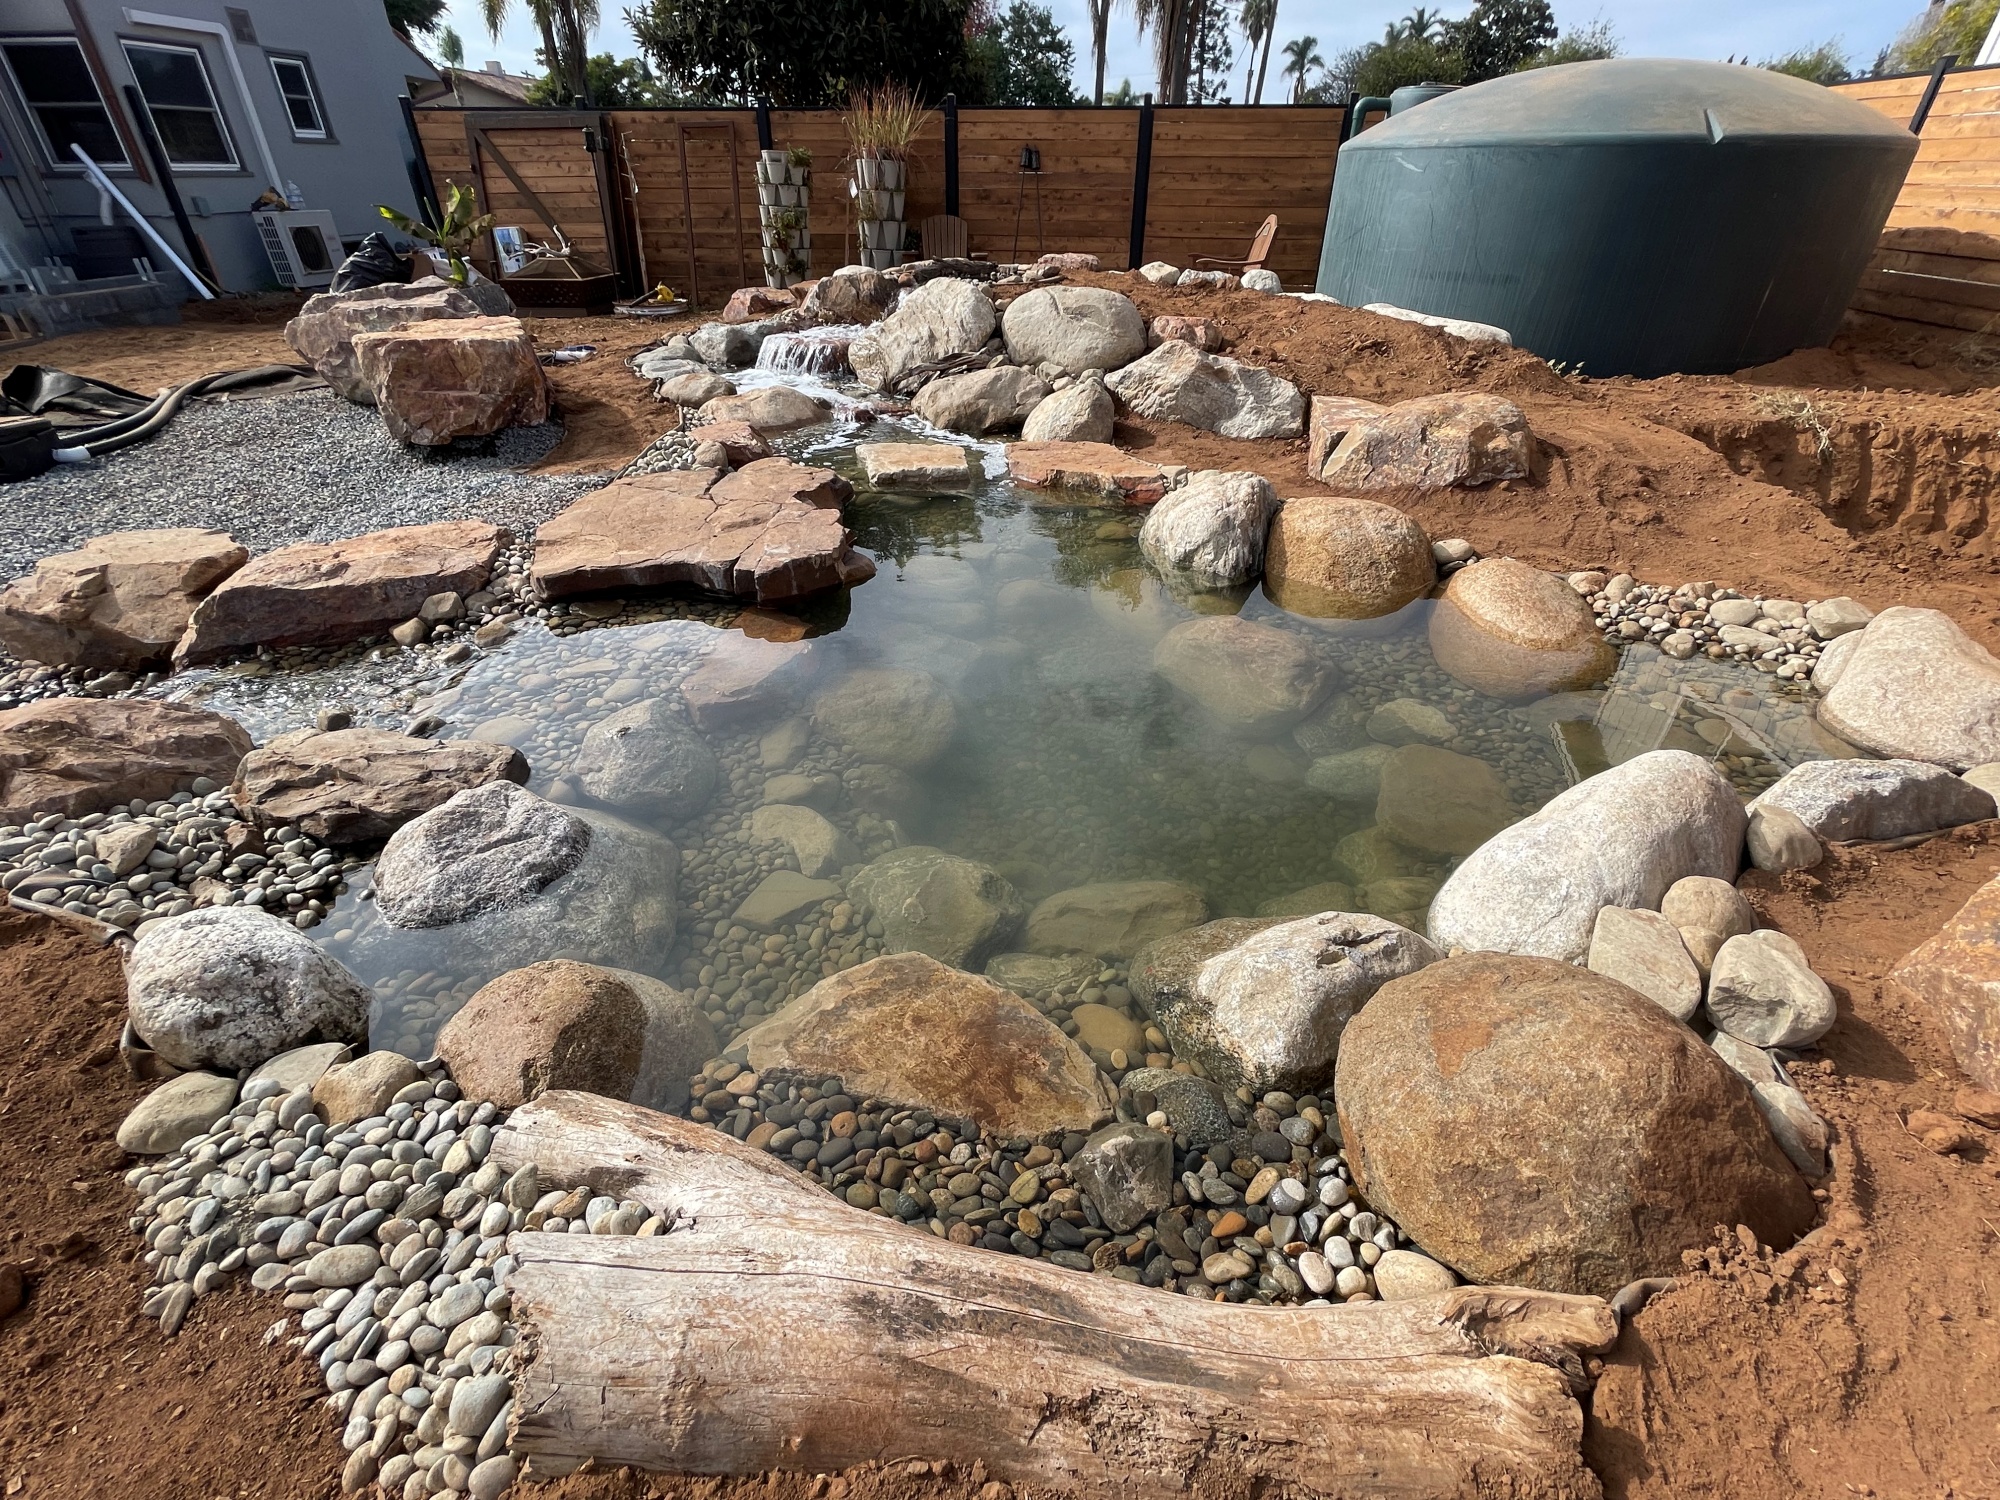 An Aquascape ecosystem pond pairs with a rainwater harvesting system to provide irrigation in drought-stricken California